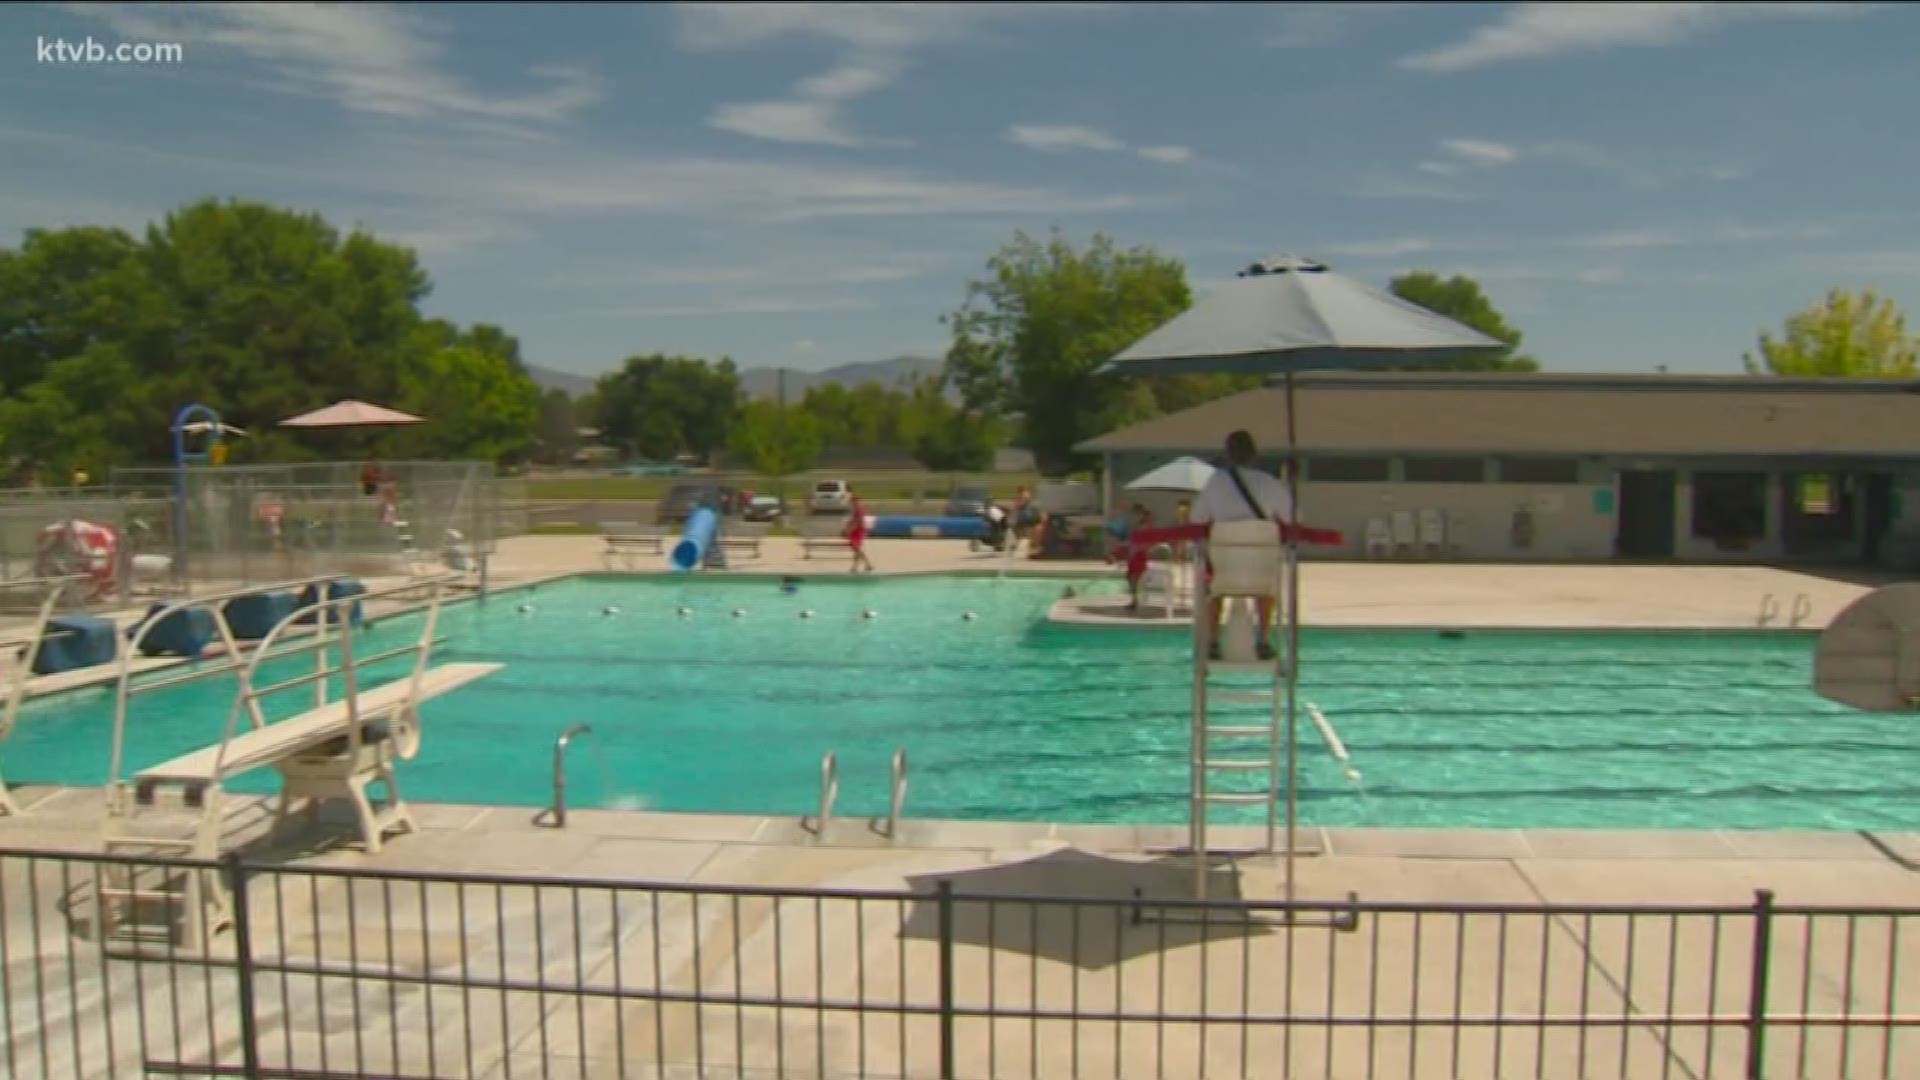 Some local pools are taking extra steps to keep the public safe.